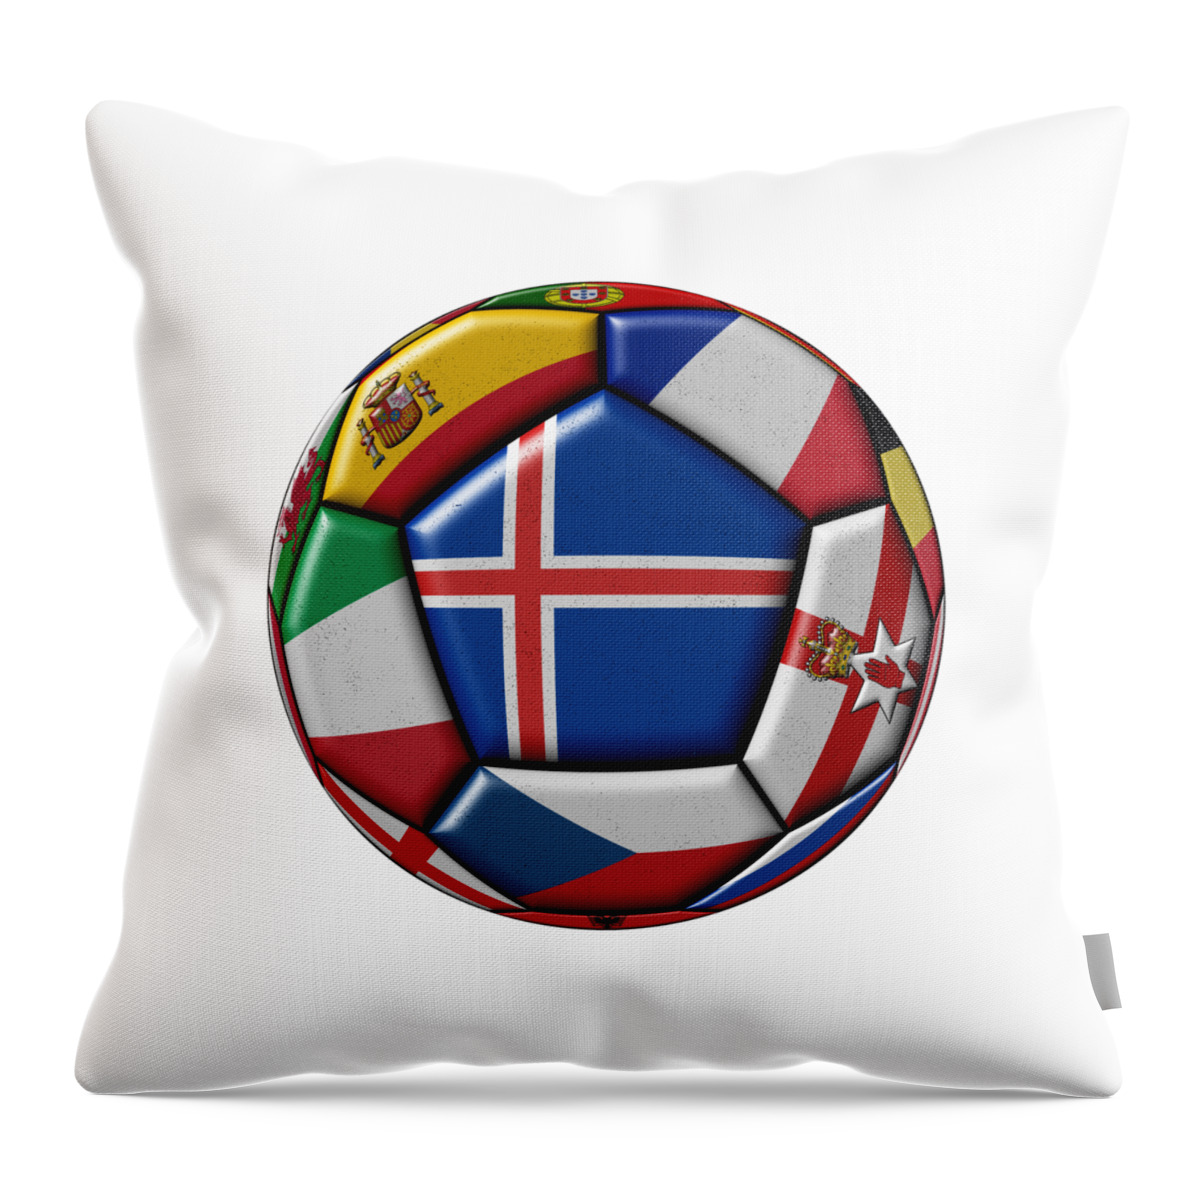 Europe Throw Pillow featuring the digital art Soccer ball with flag of Iceland in the center by Michal Boubin